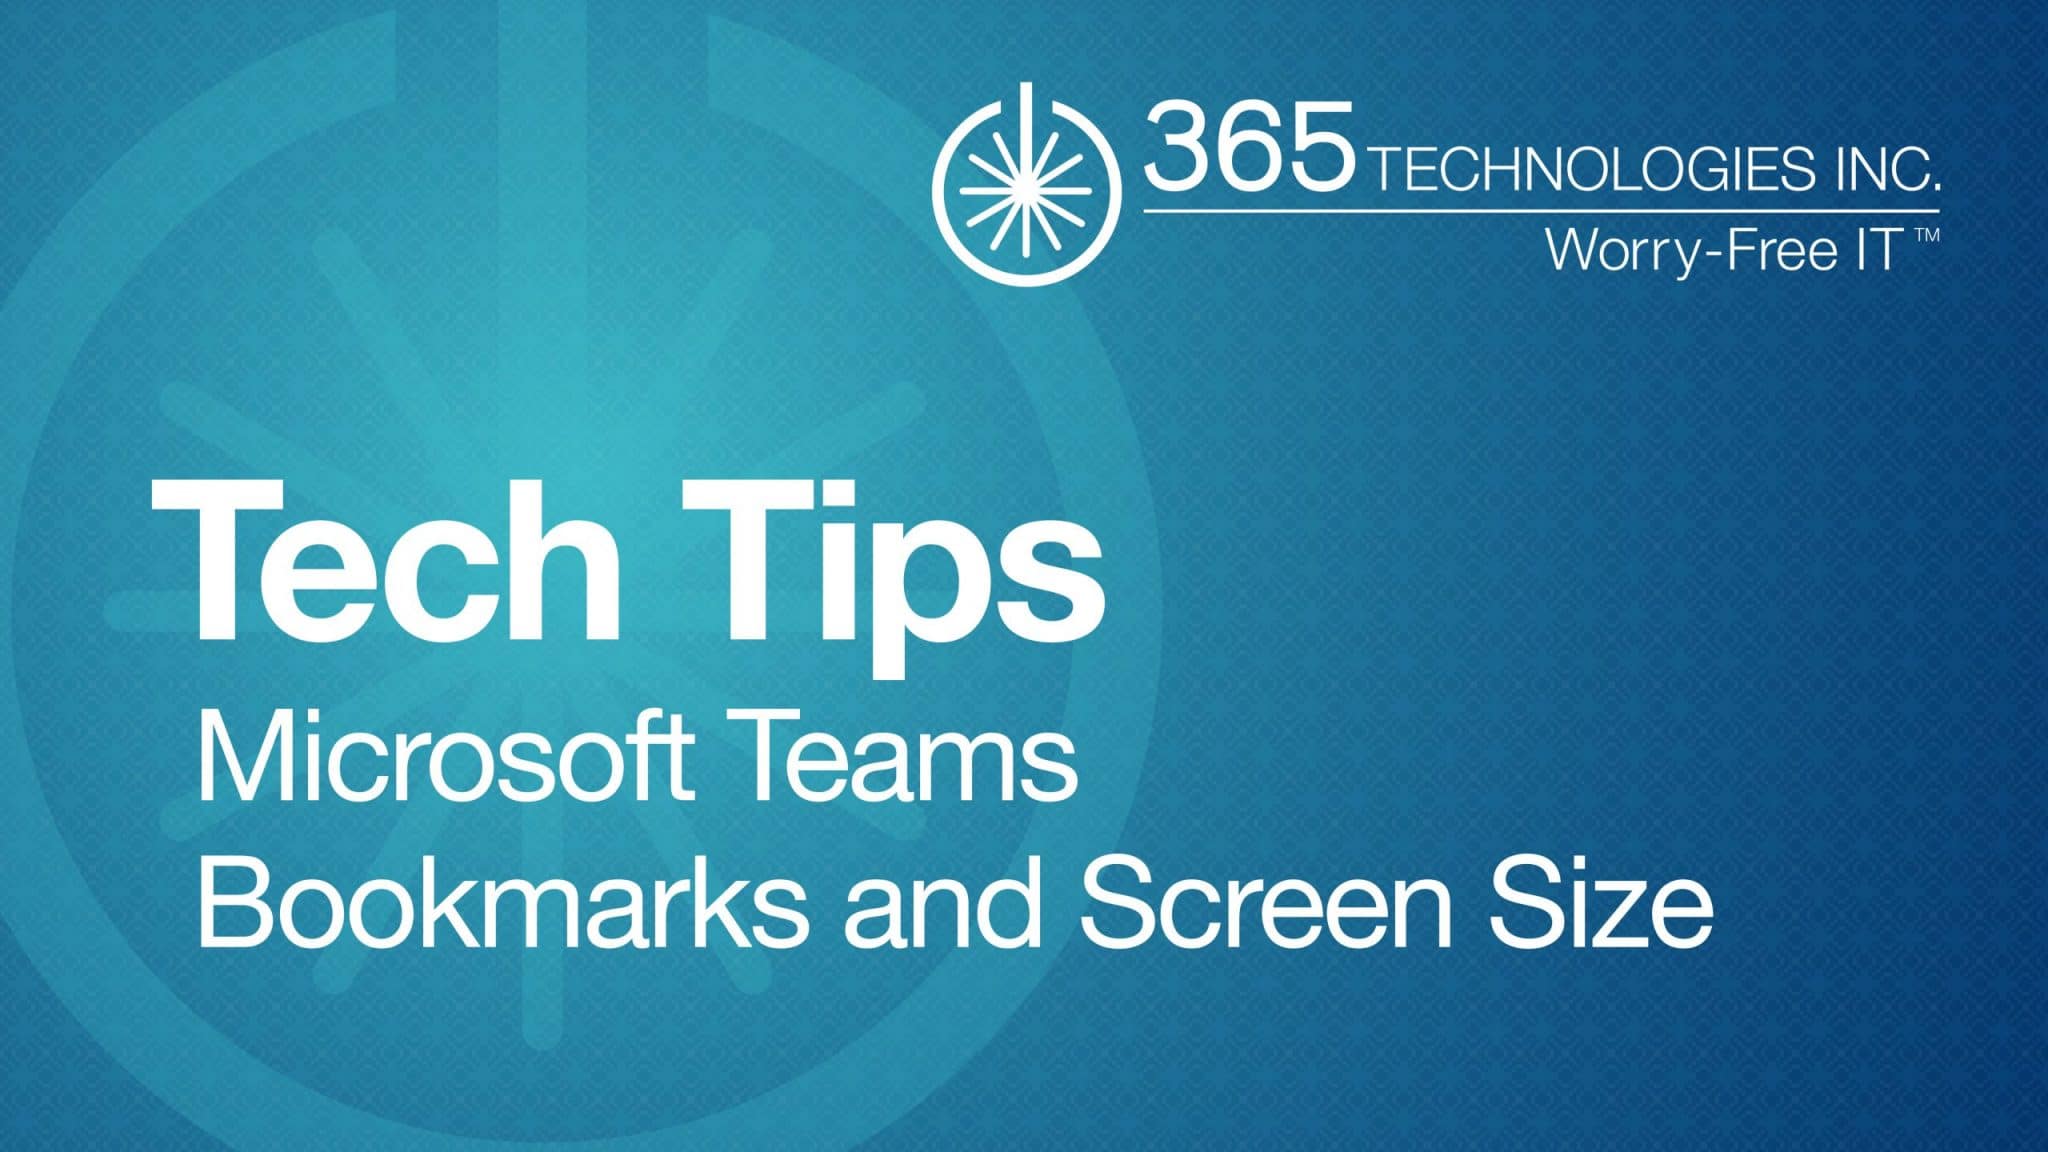 Tech Tips: Microsoft Teams Bookmarks and Screen Size